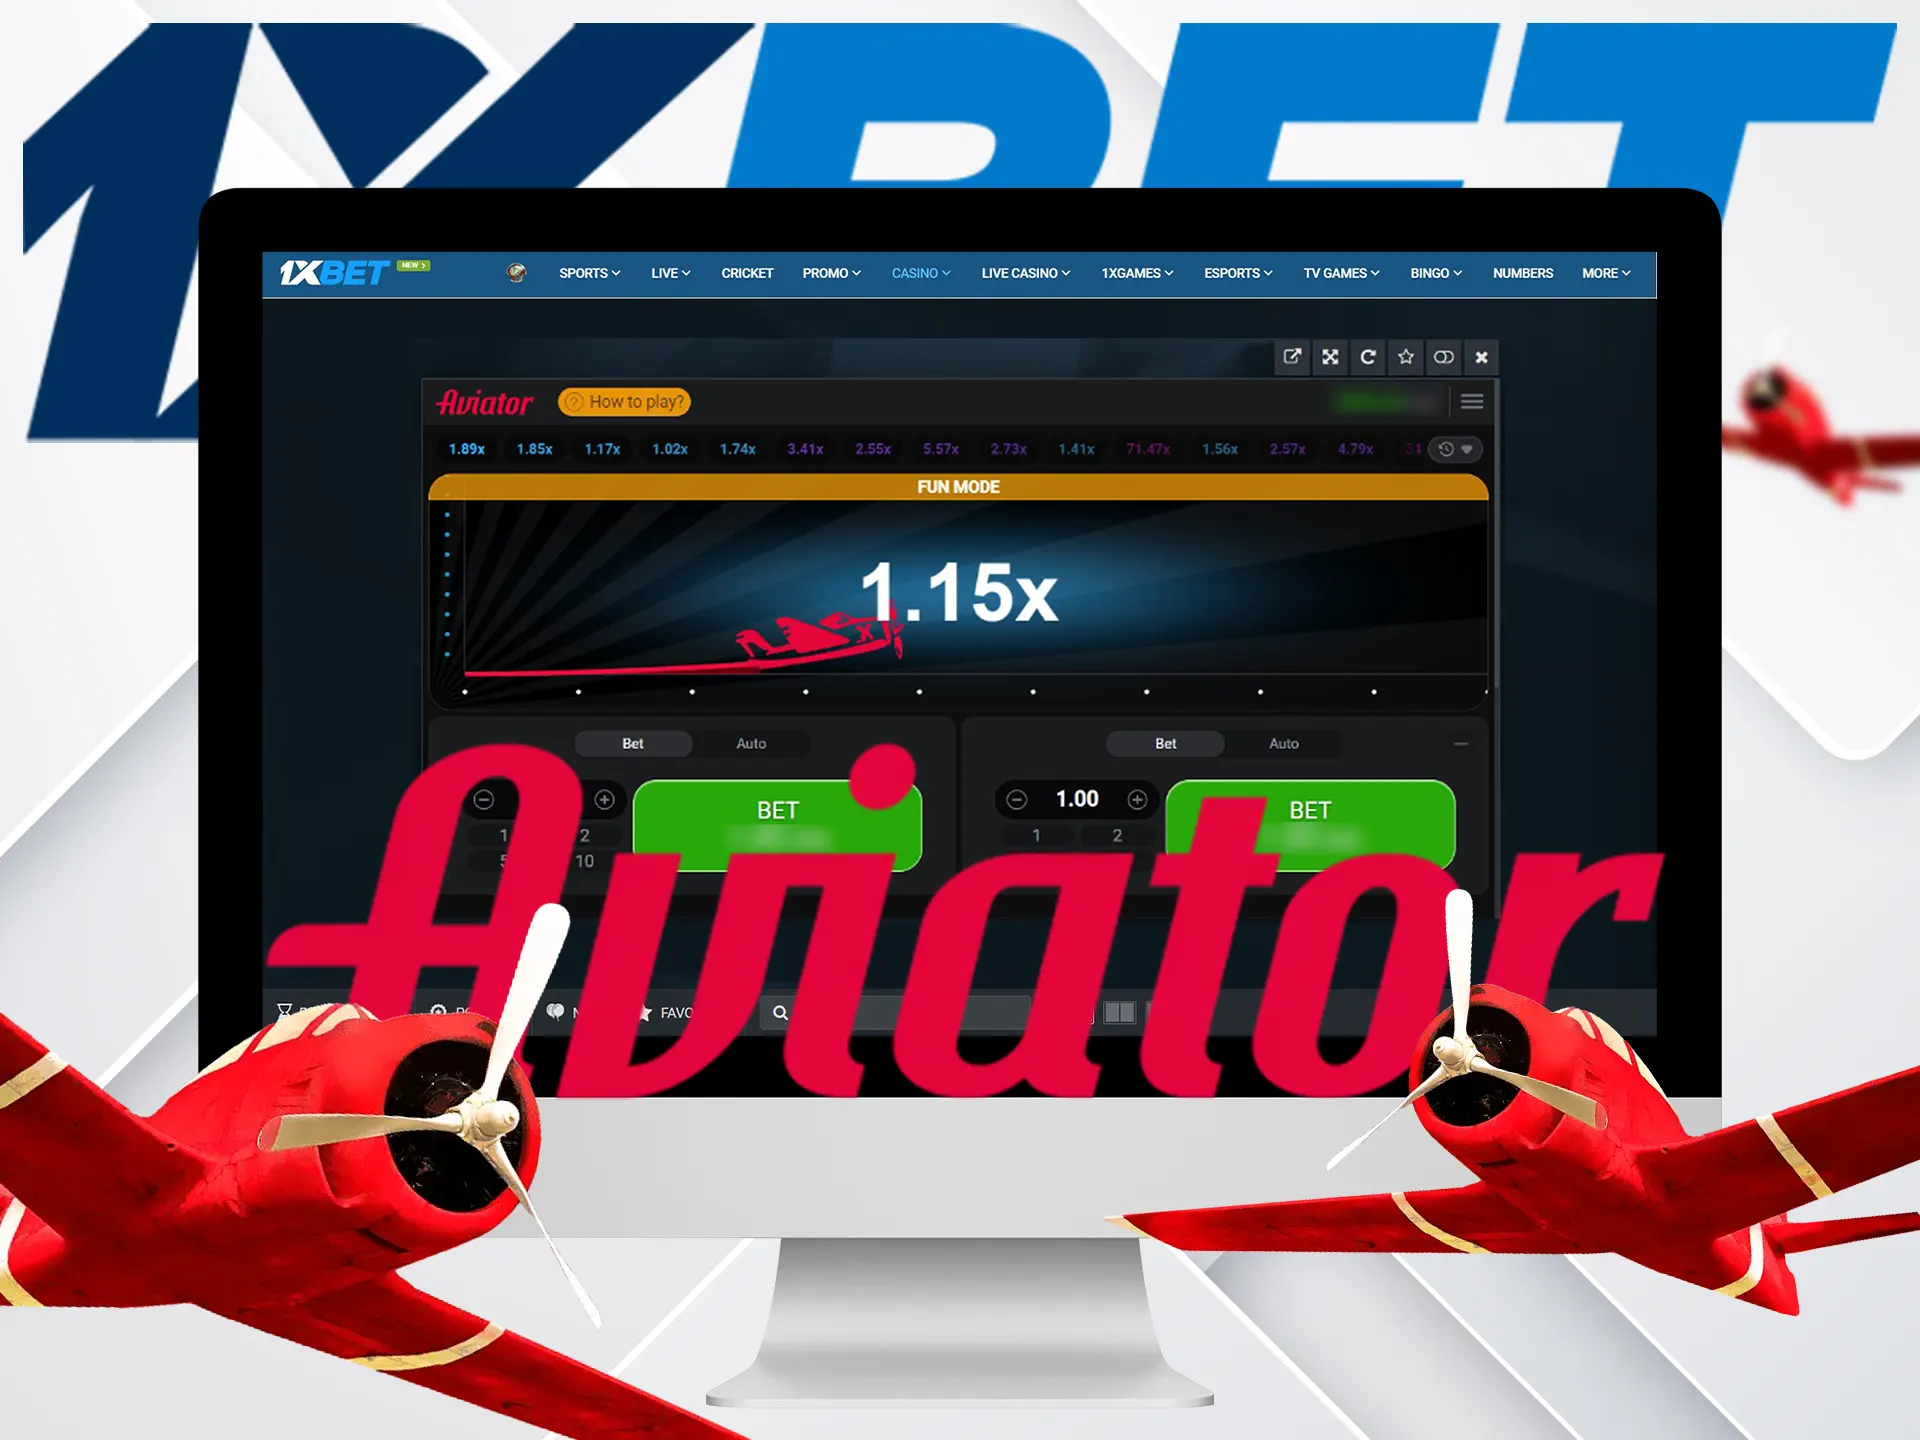 The official 1xBet website features a demo version of the Aviator game.